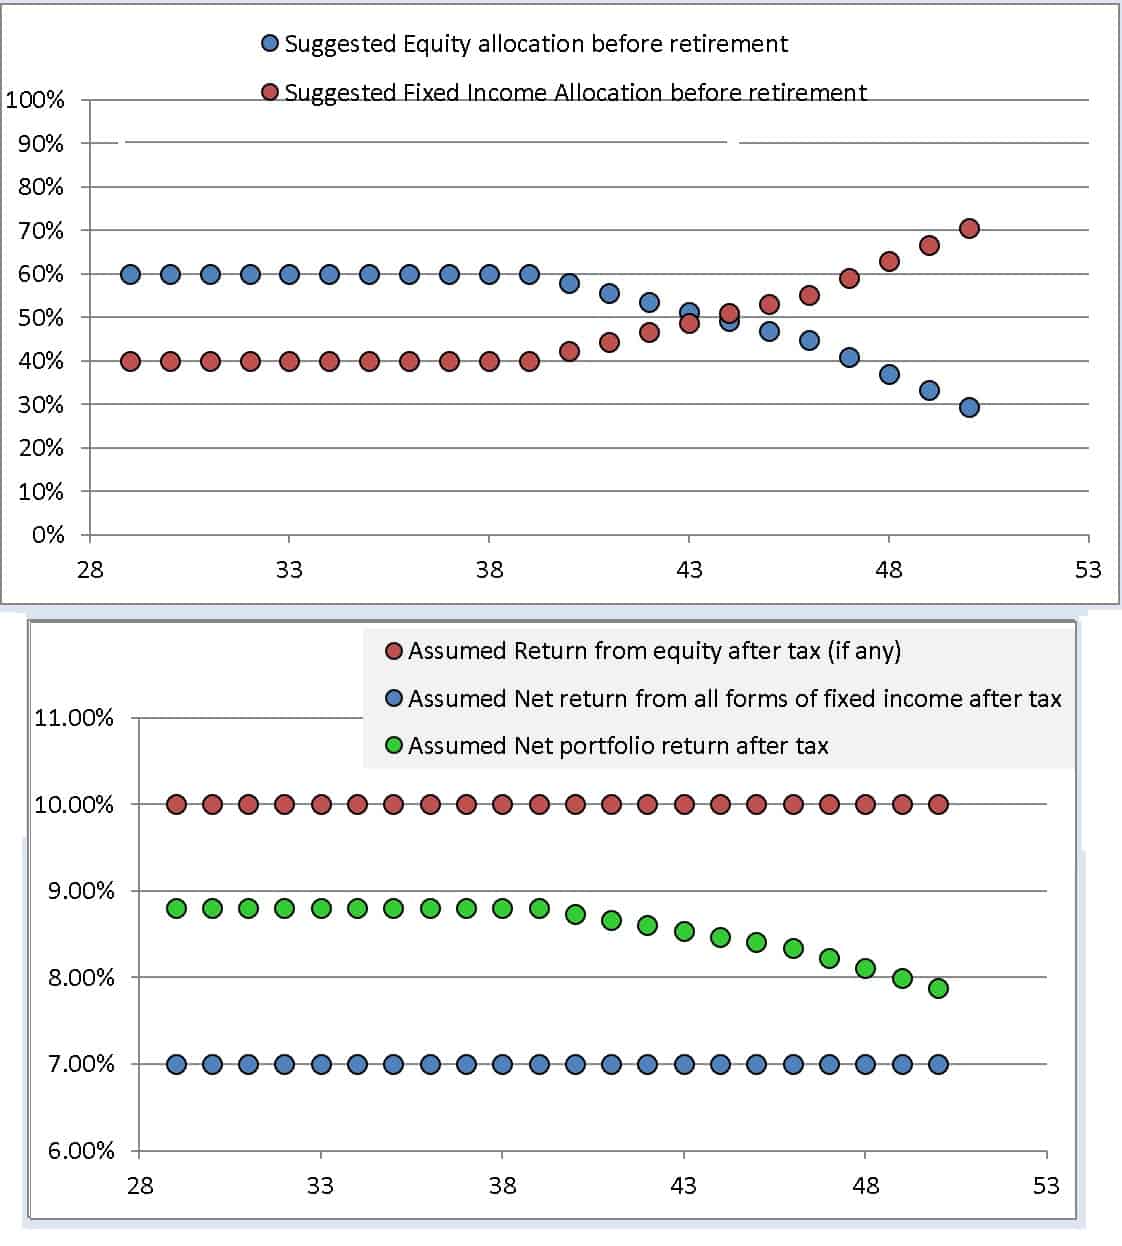 Suggested asset allocation and change in assumed portfolio return by the freefincal robo advisory tool